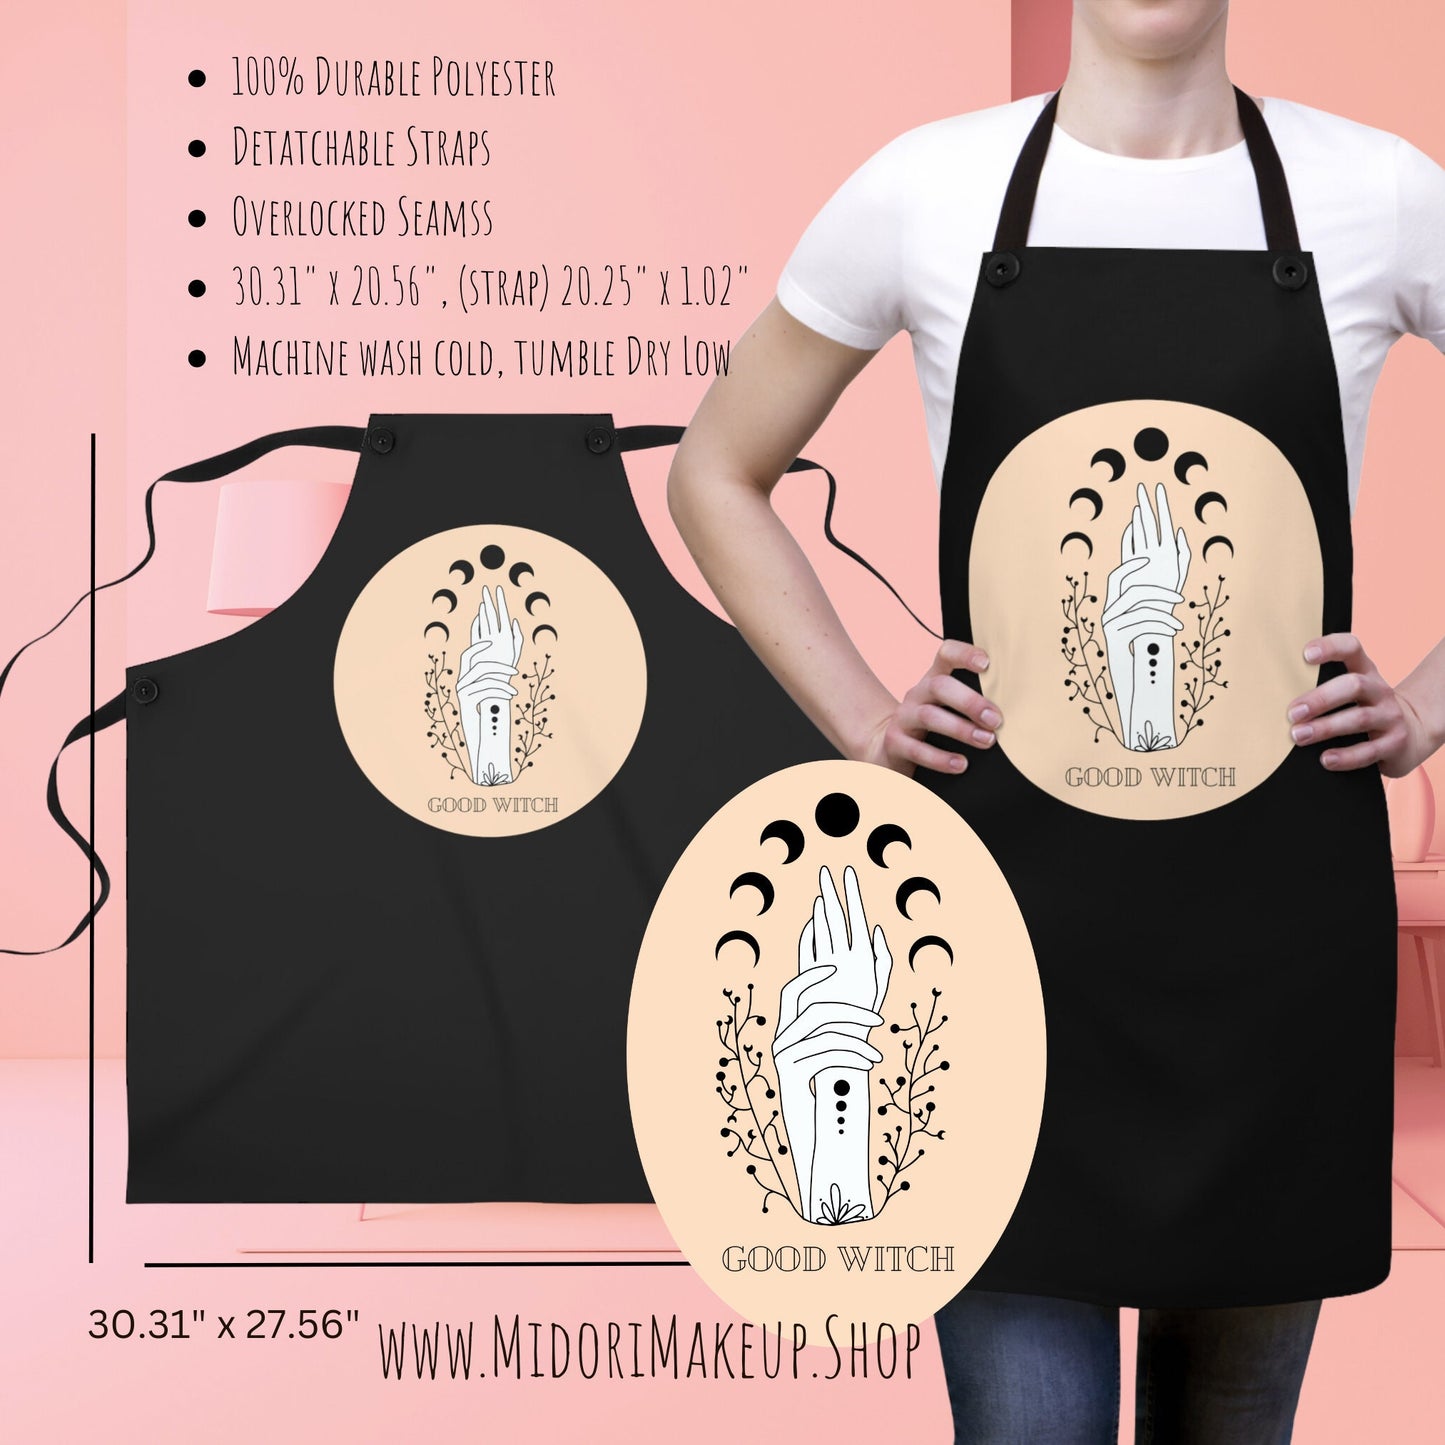 Good Witch Celestial Moon Phases Witchy Vibes Star Girl Cute Halloween Costume Kitchen Witch Fall Gift Herbalist Plant Lady Herbalist Apron